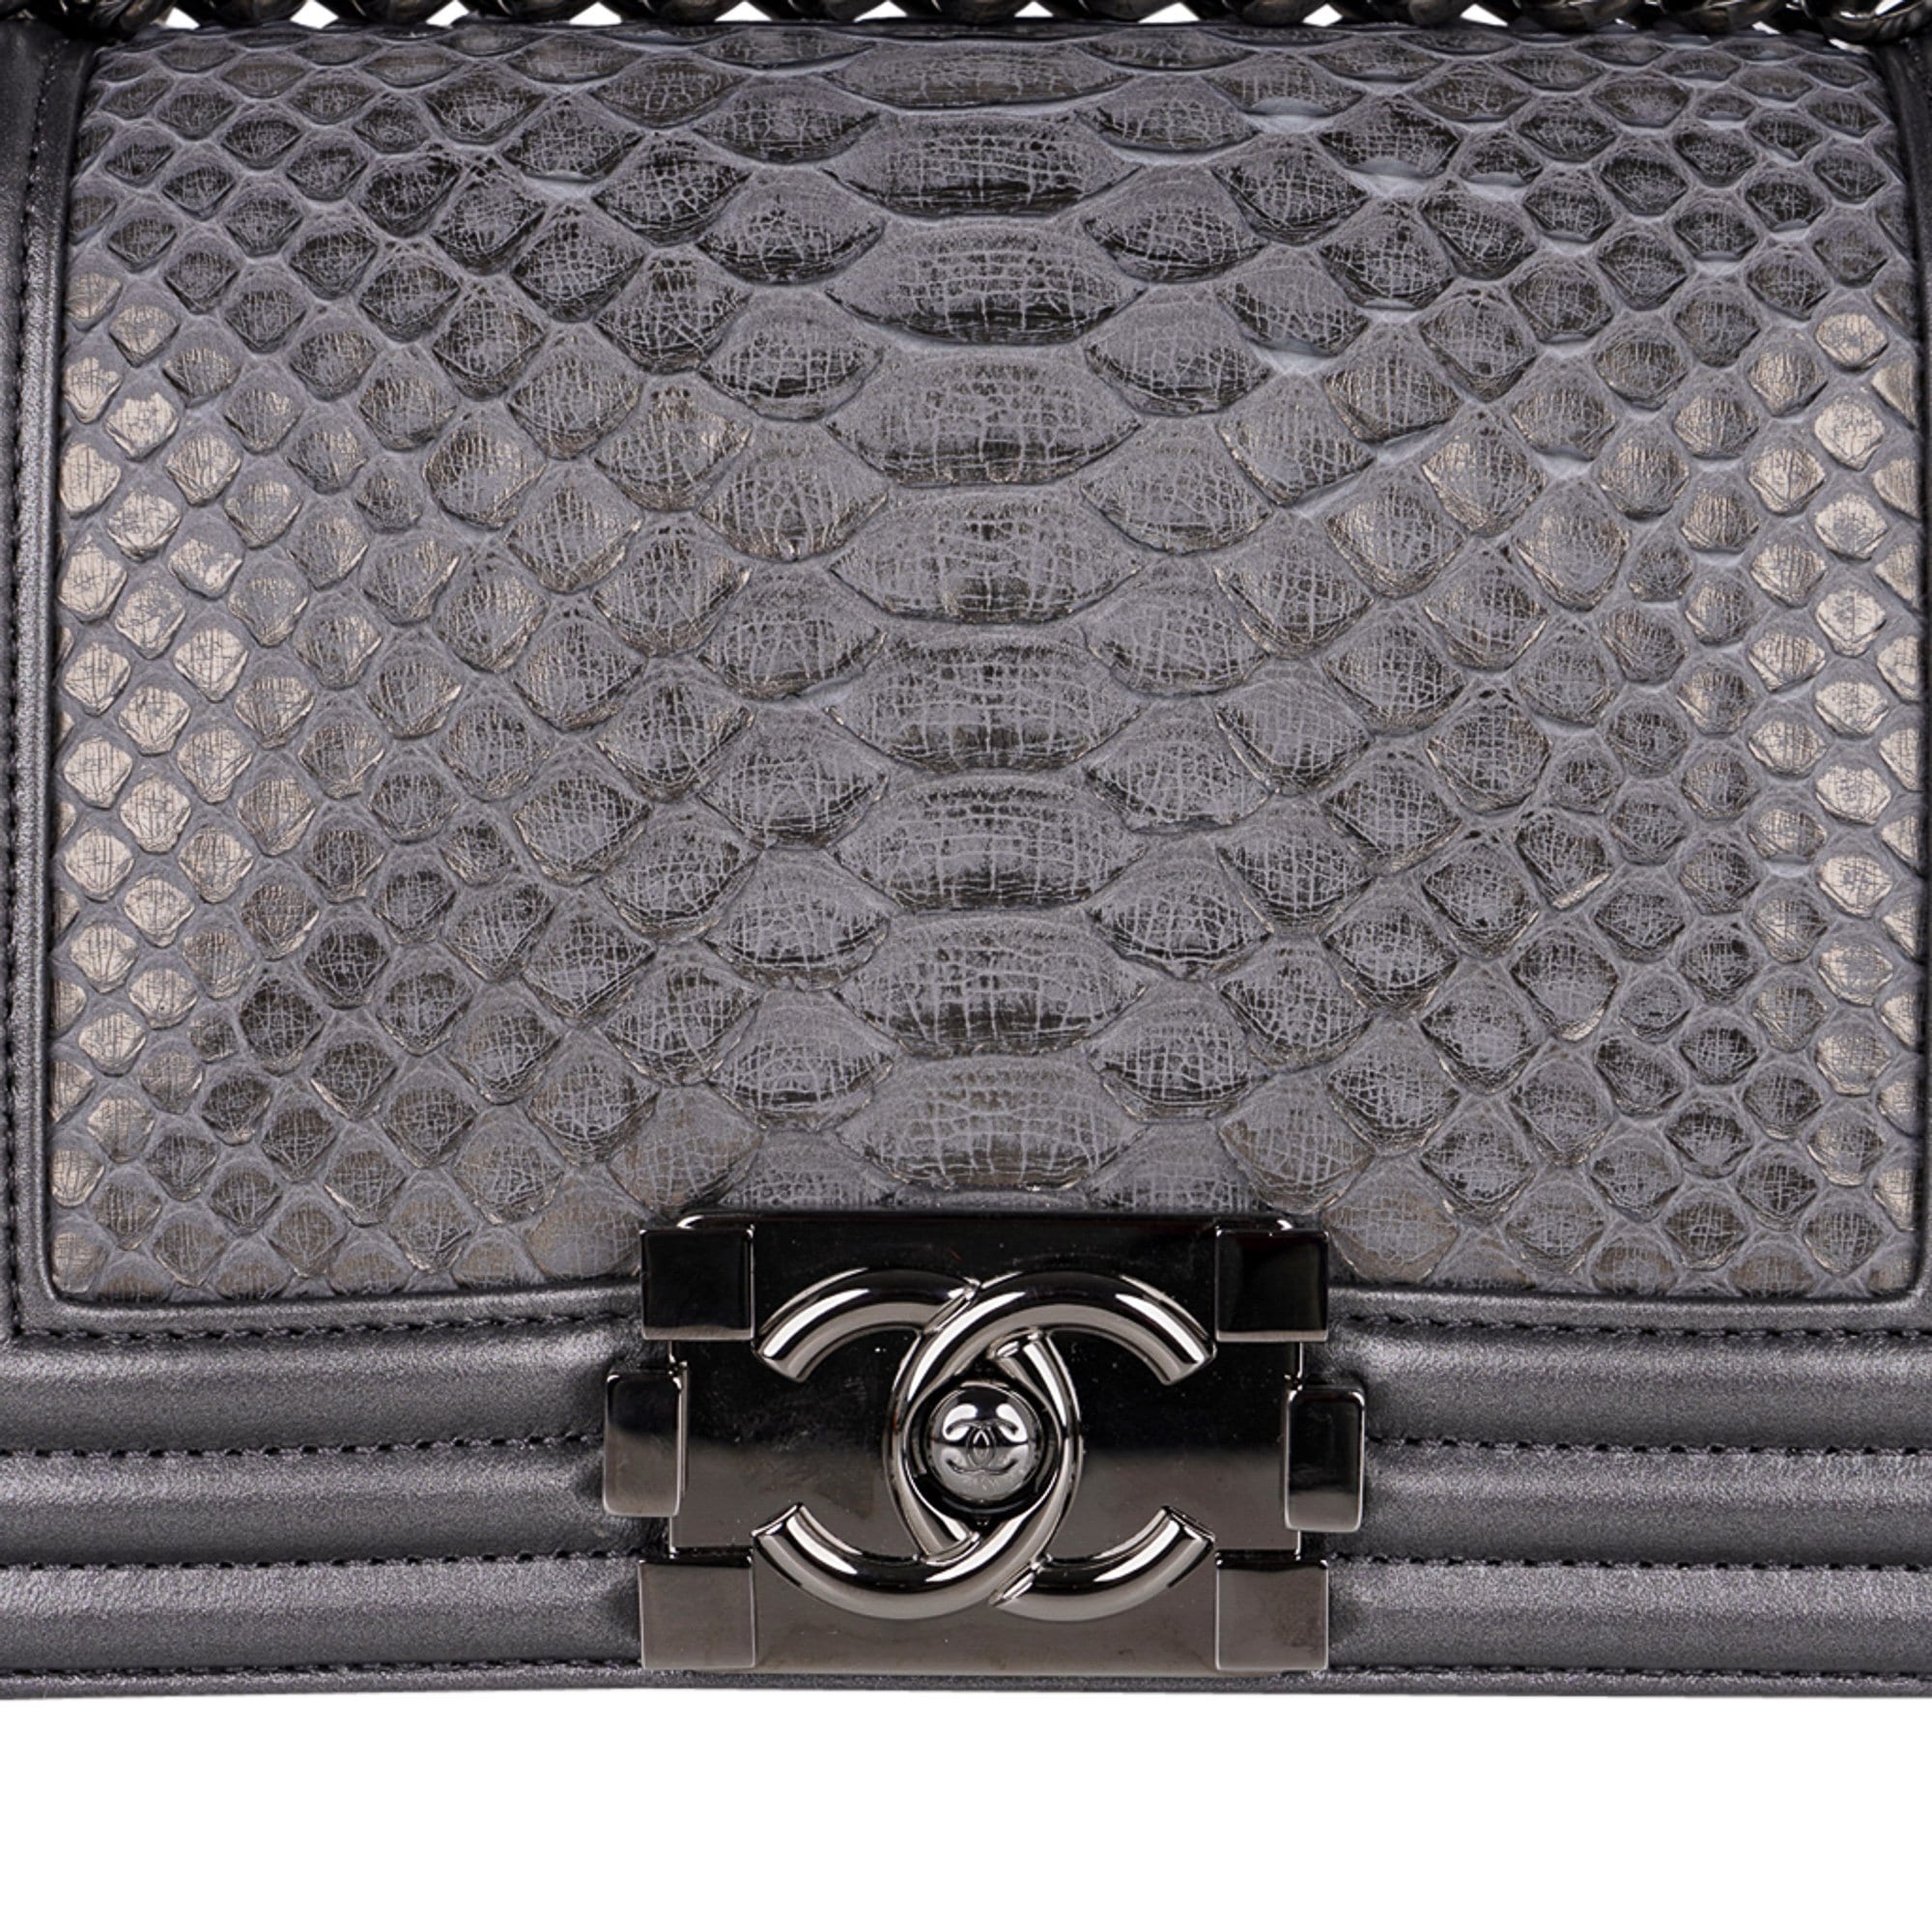 chanel with silver hardware bag